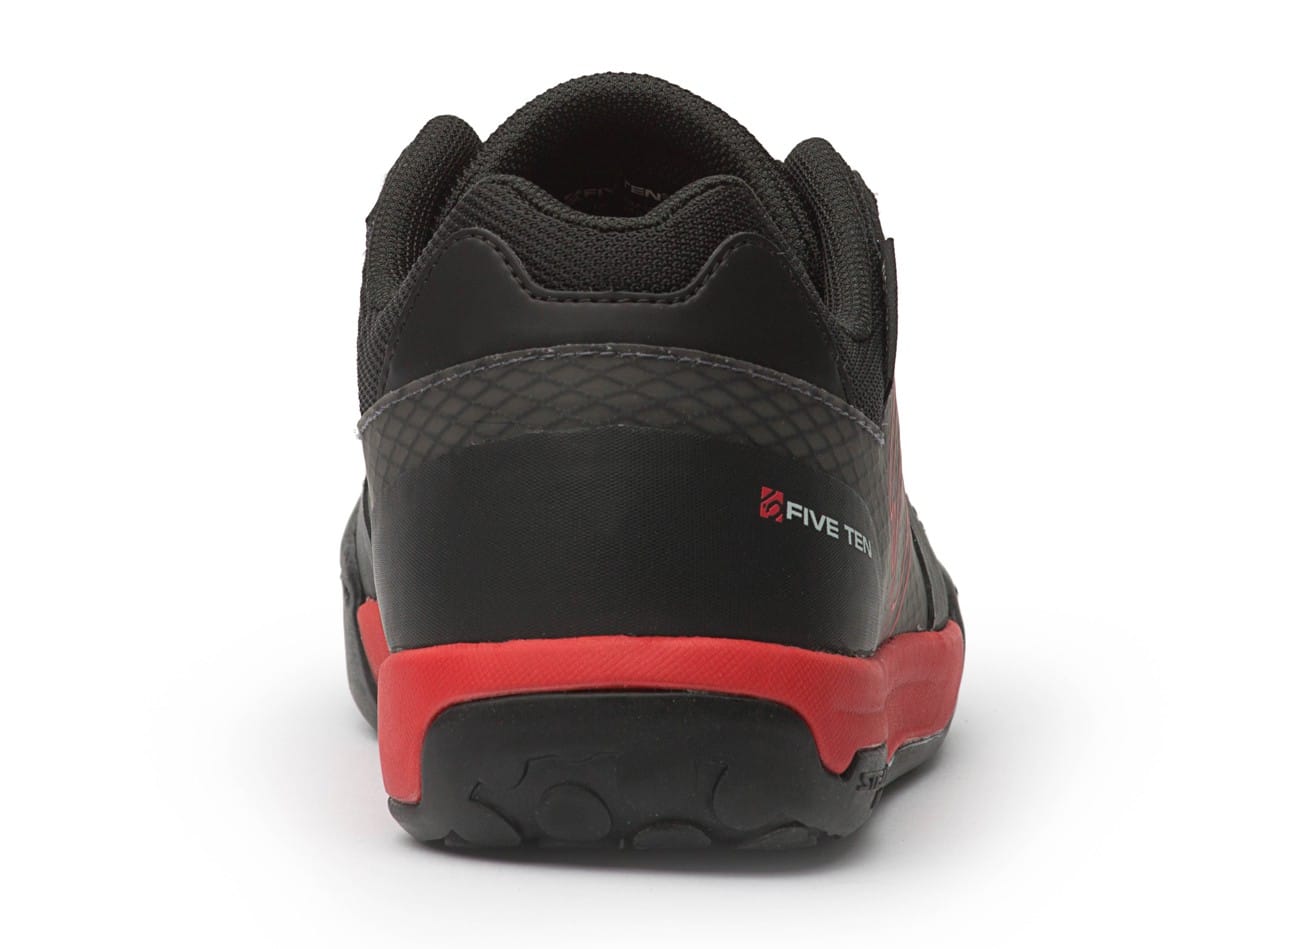 FIVE TEN FREERIDER CONTACT ALL-MOUNTAIN SHOE - BLACK/RED